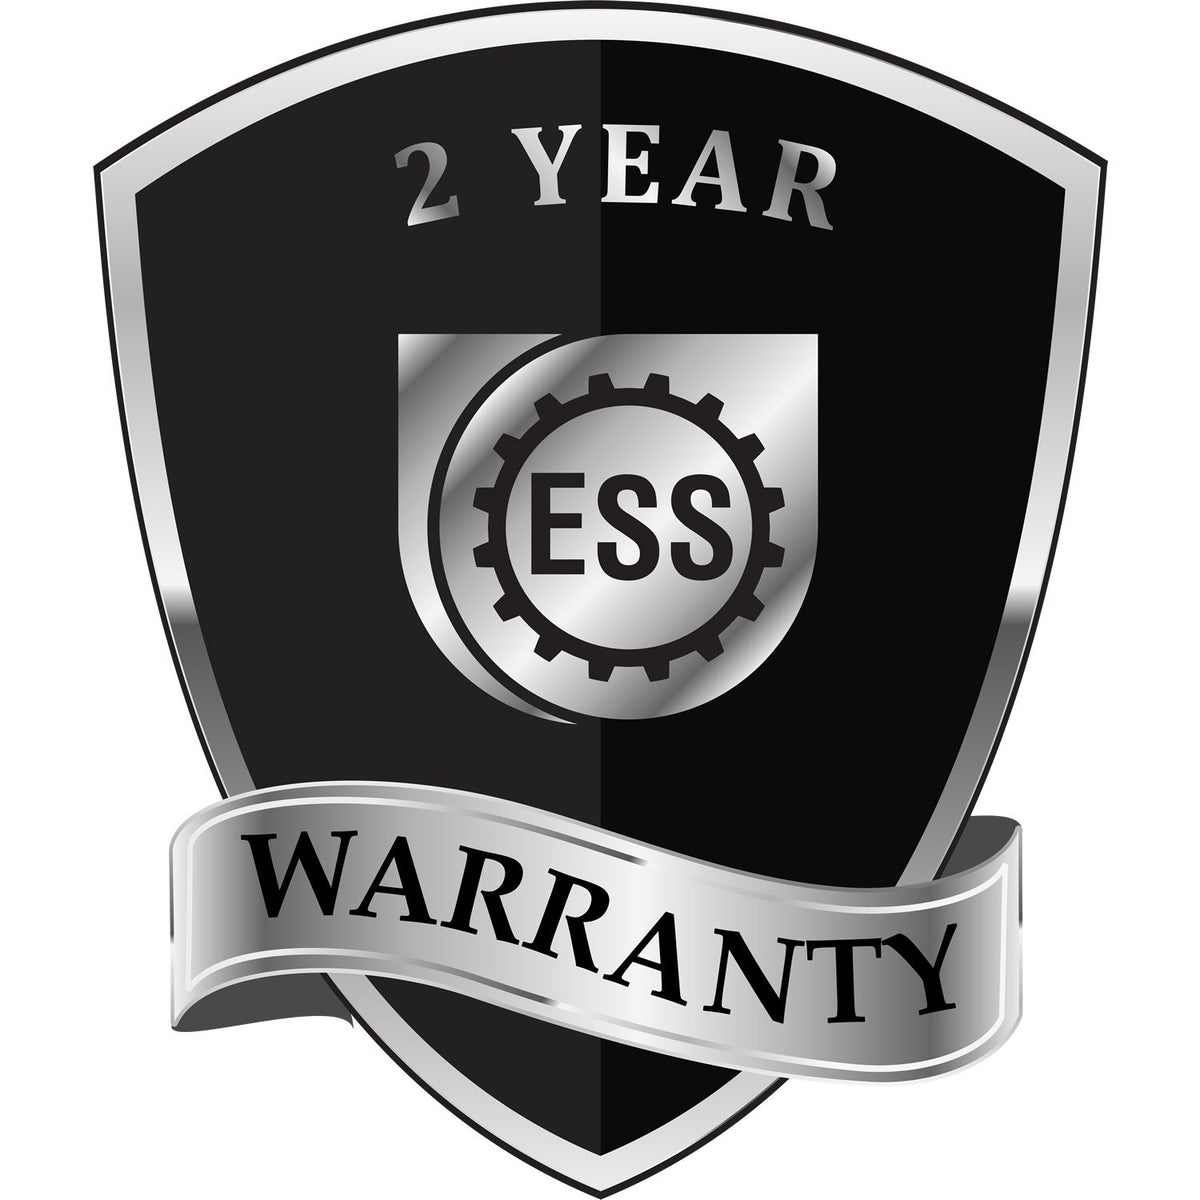 A black and silver badge or emblem showing warranty information for the Hybrid New York Landscape Architect Seal